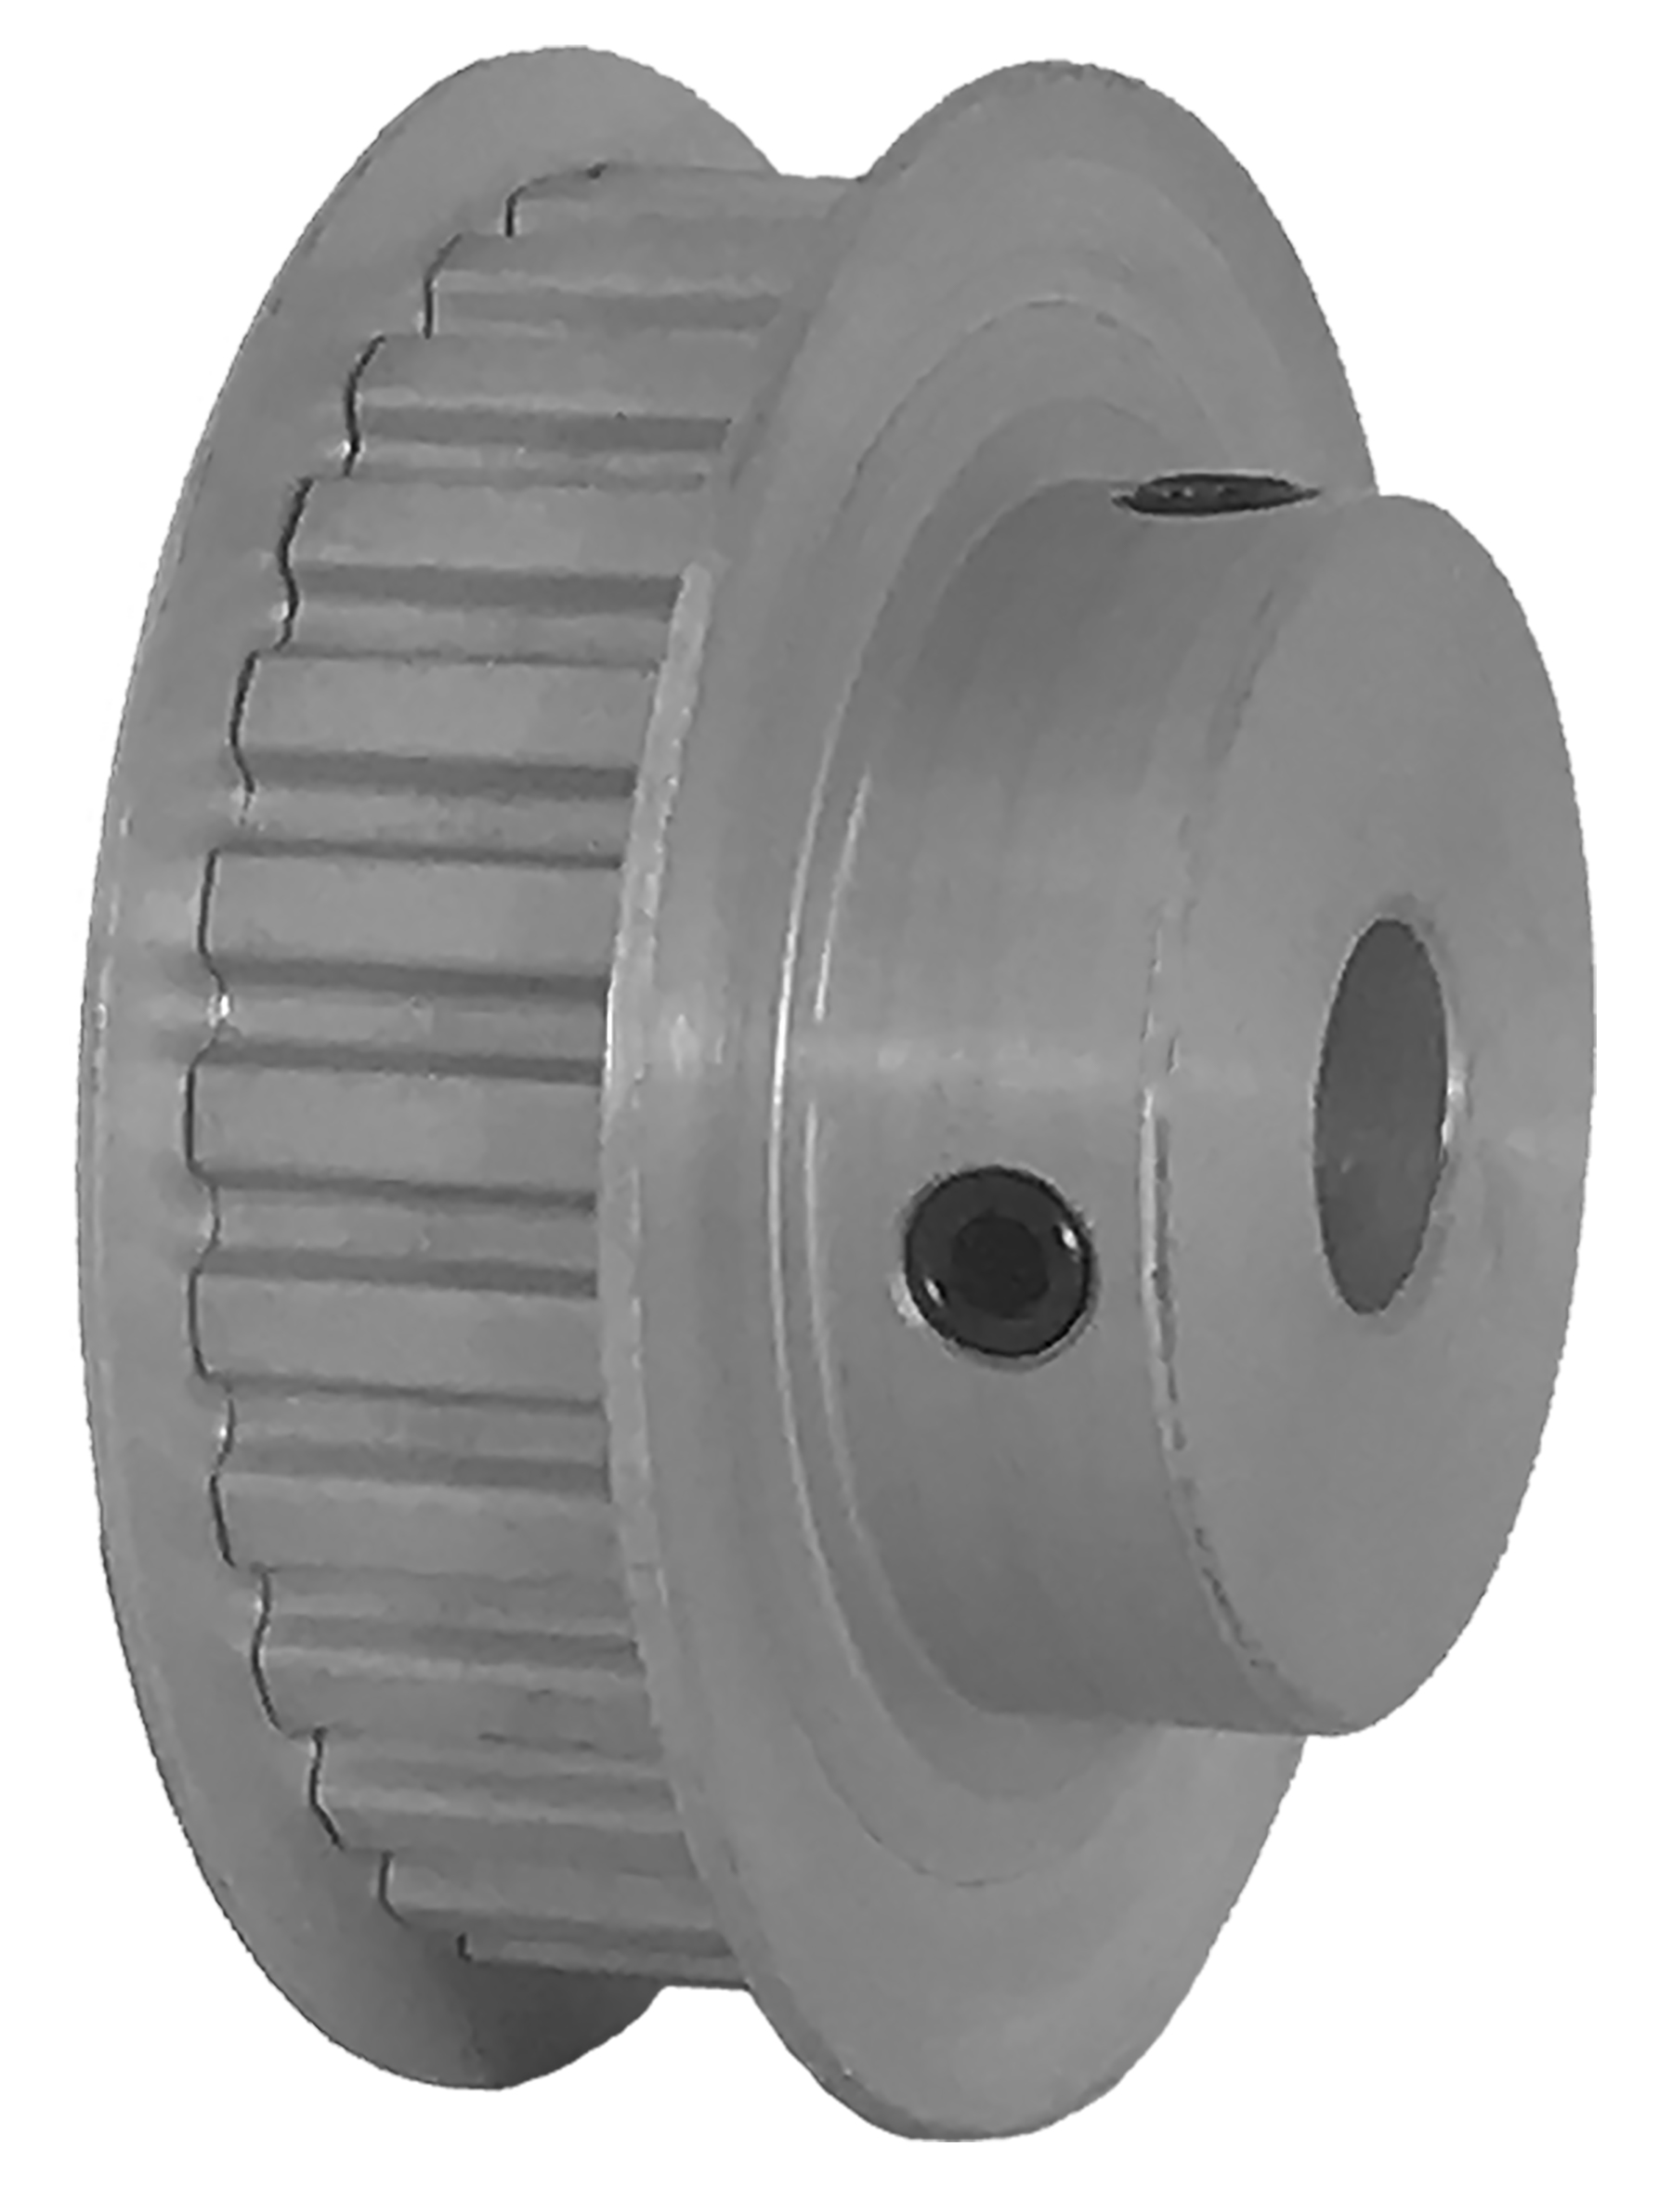 28XL037-6FA5 - Aluminum Imperial Pitch Pulleys